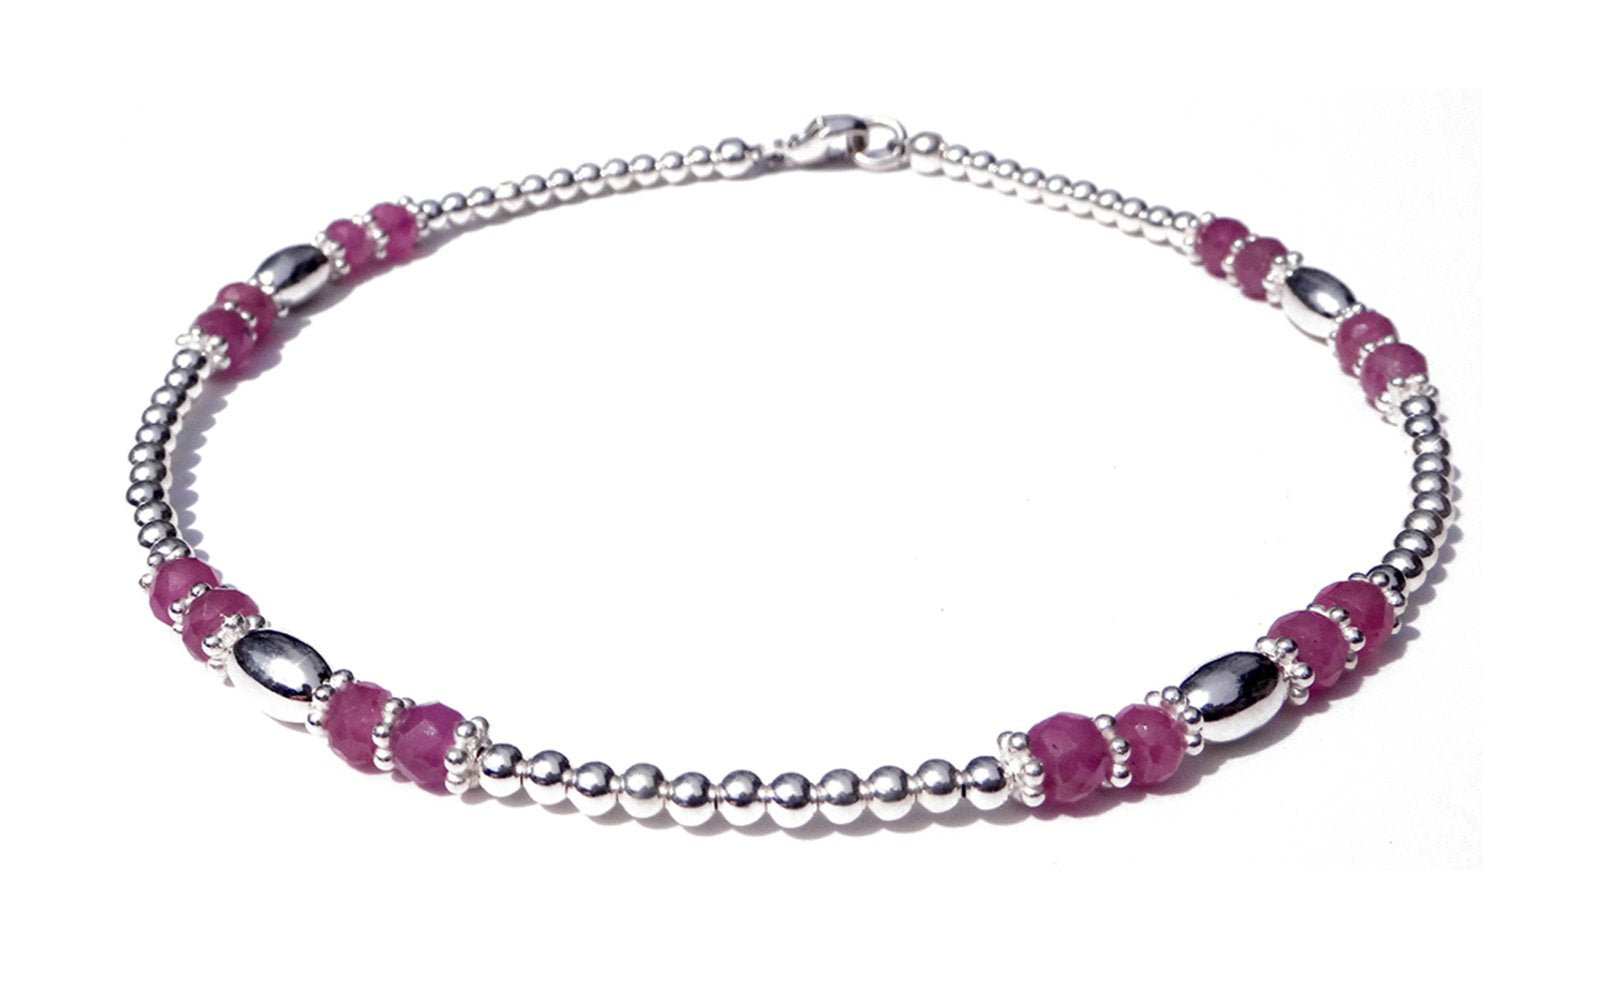 16 Bright Pink Sapphire Gemstones in this Sterling Silver Beaded Anklet. Just 1 of many styles!